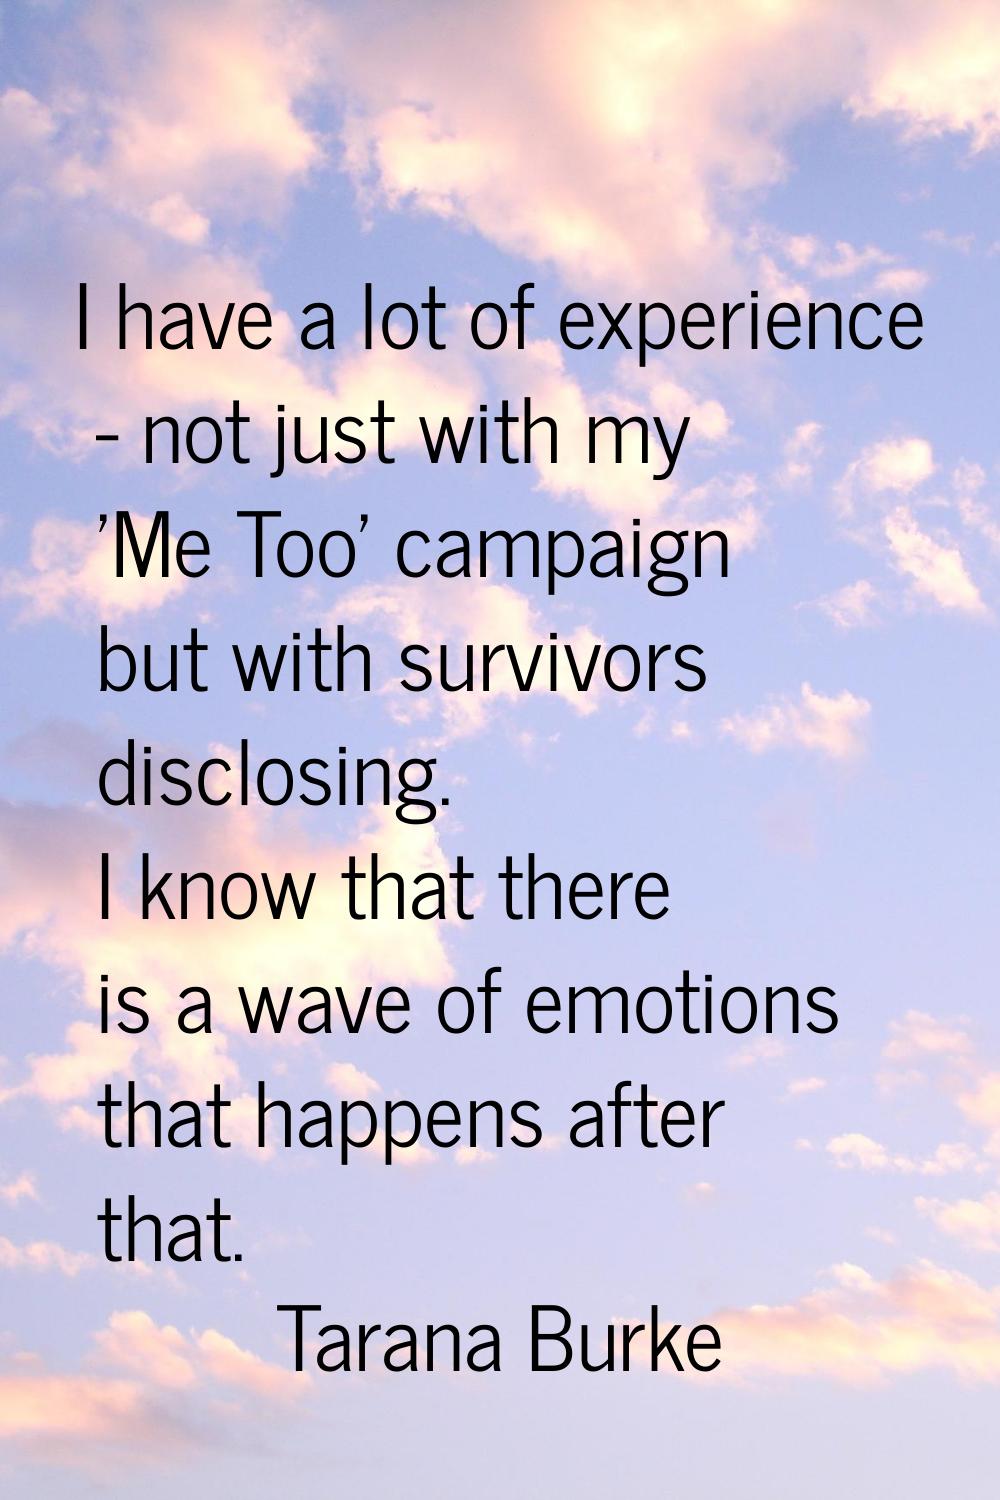 I have a lot of experience - not just with my 'Me Too' campaign but with survivors disclosing. I kn